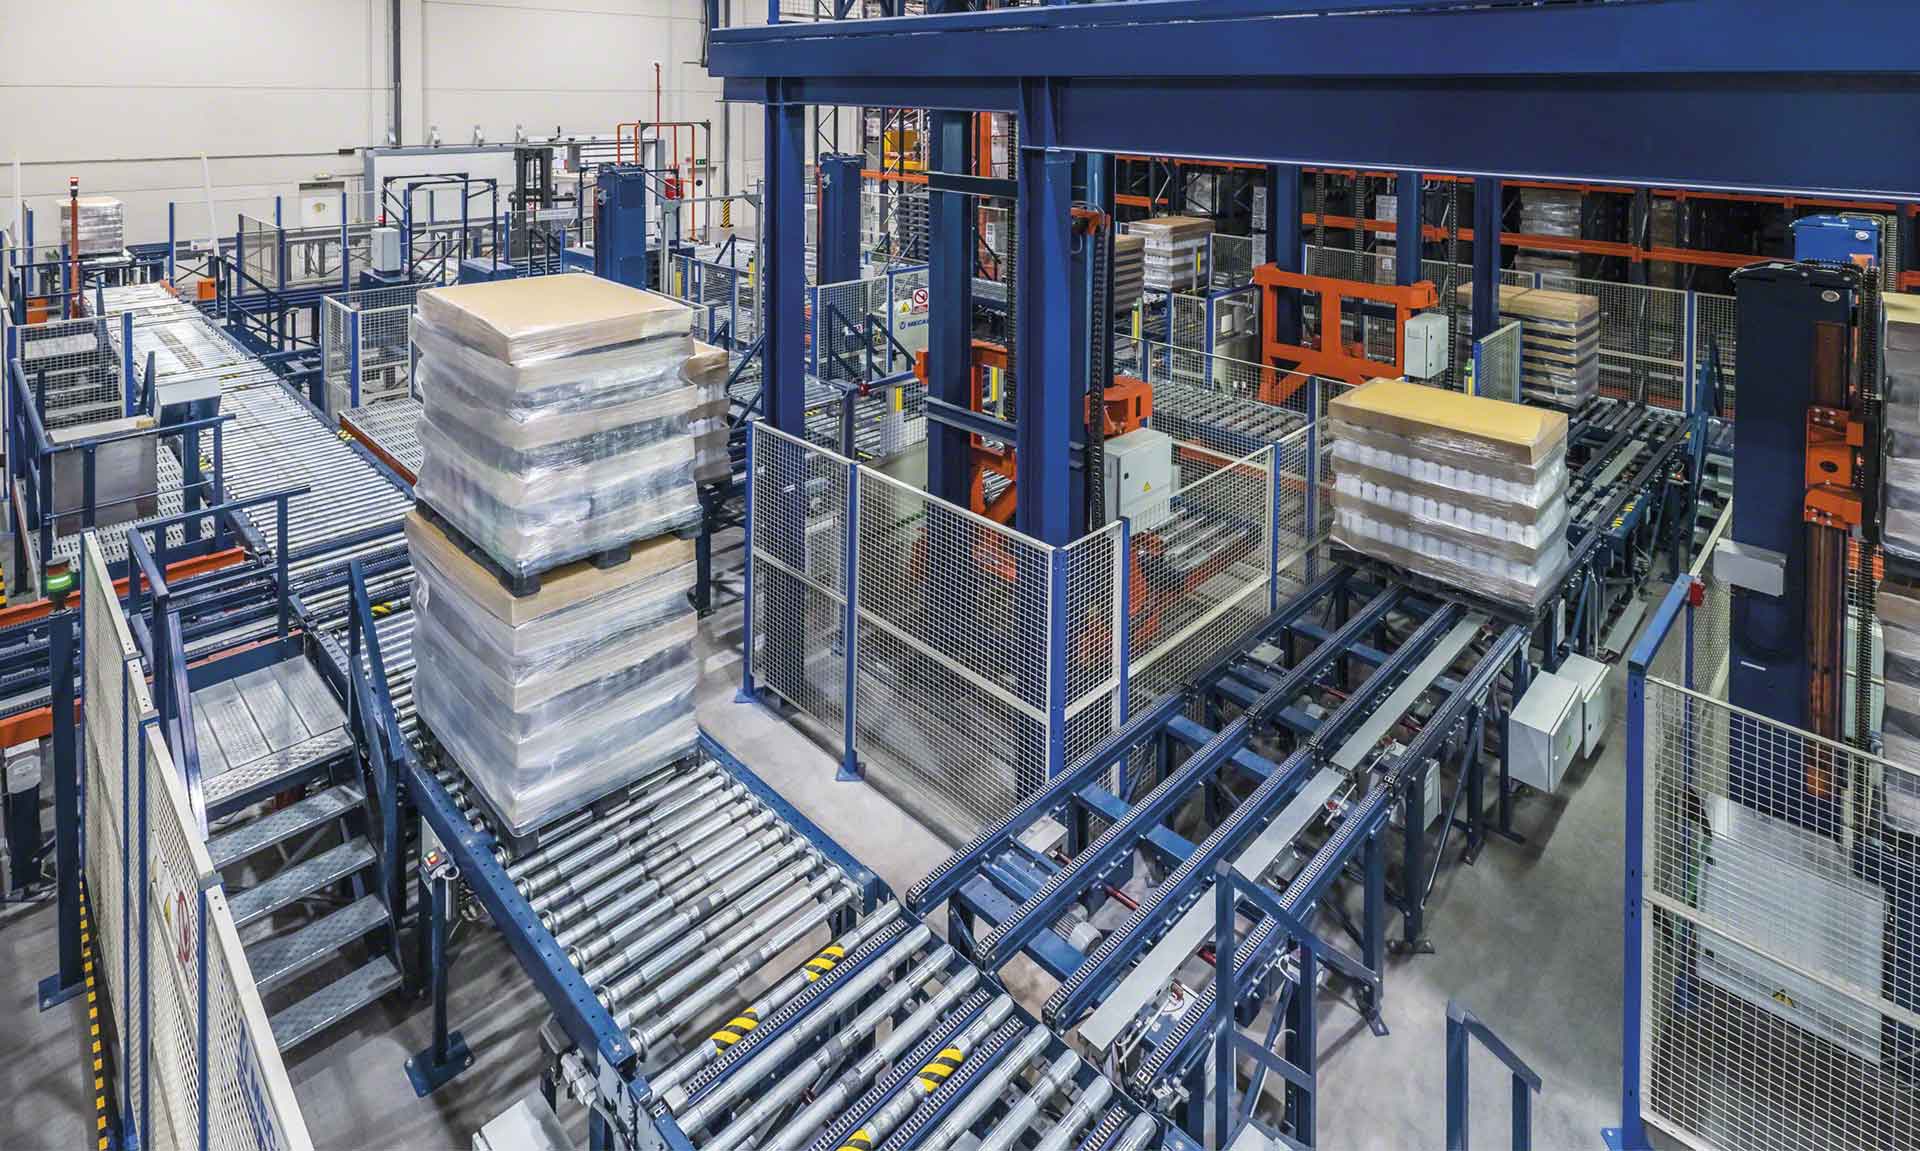 Motorized roller conveyors: when to install them